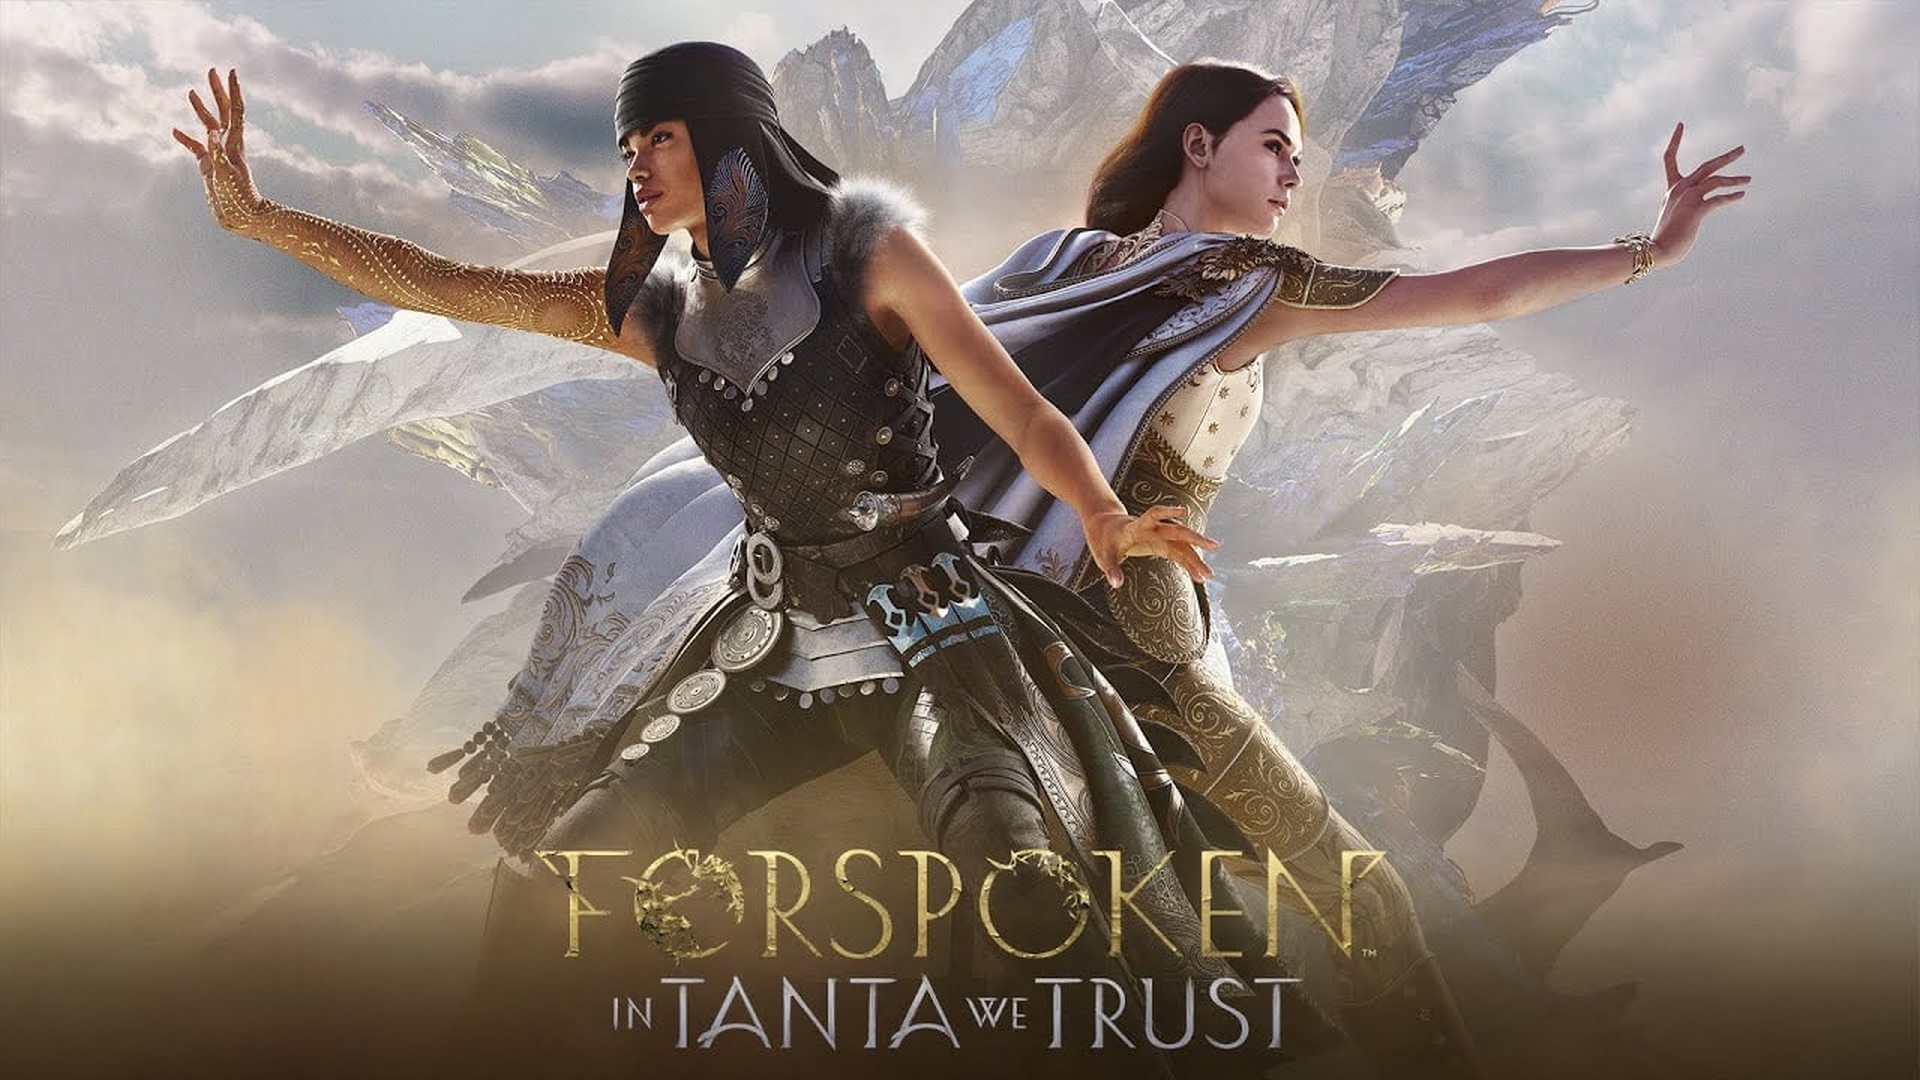 Forspoken: In Tanta We Trust DLC Available Now